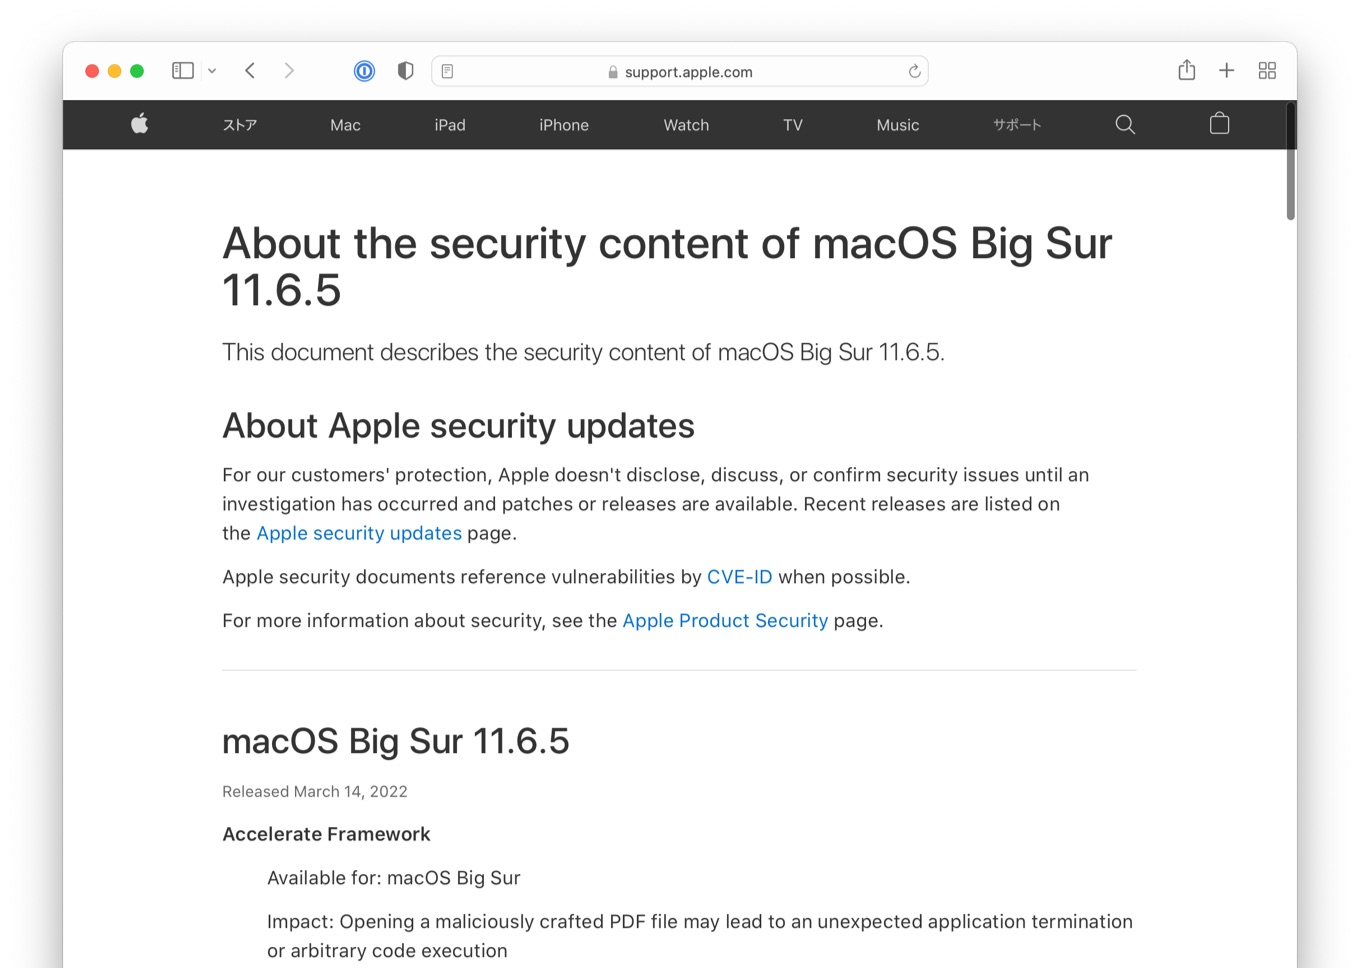 About the security content of macOS Big Sur 11.6.5